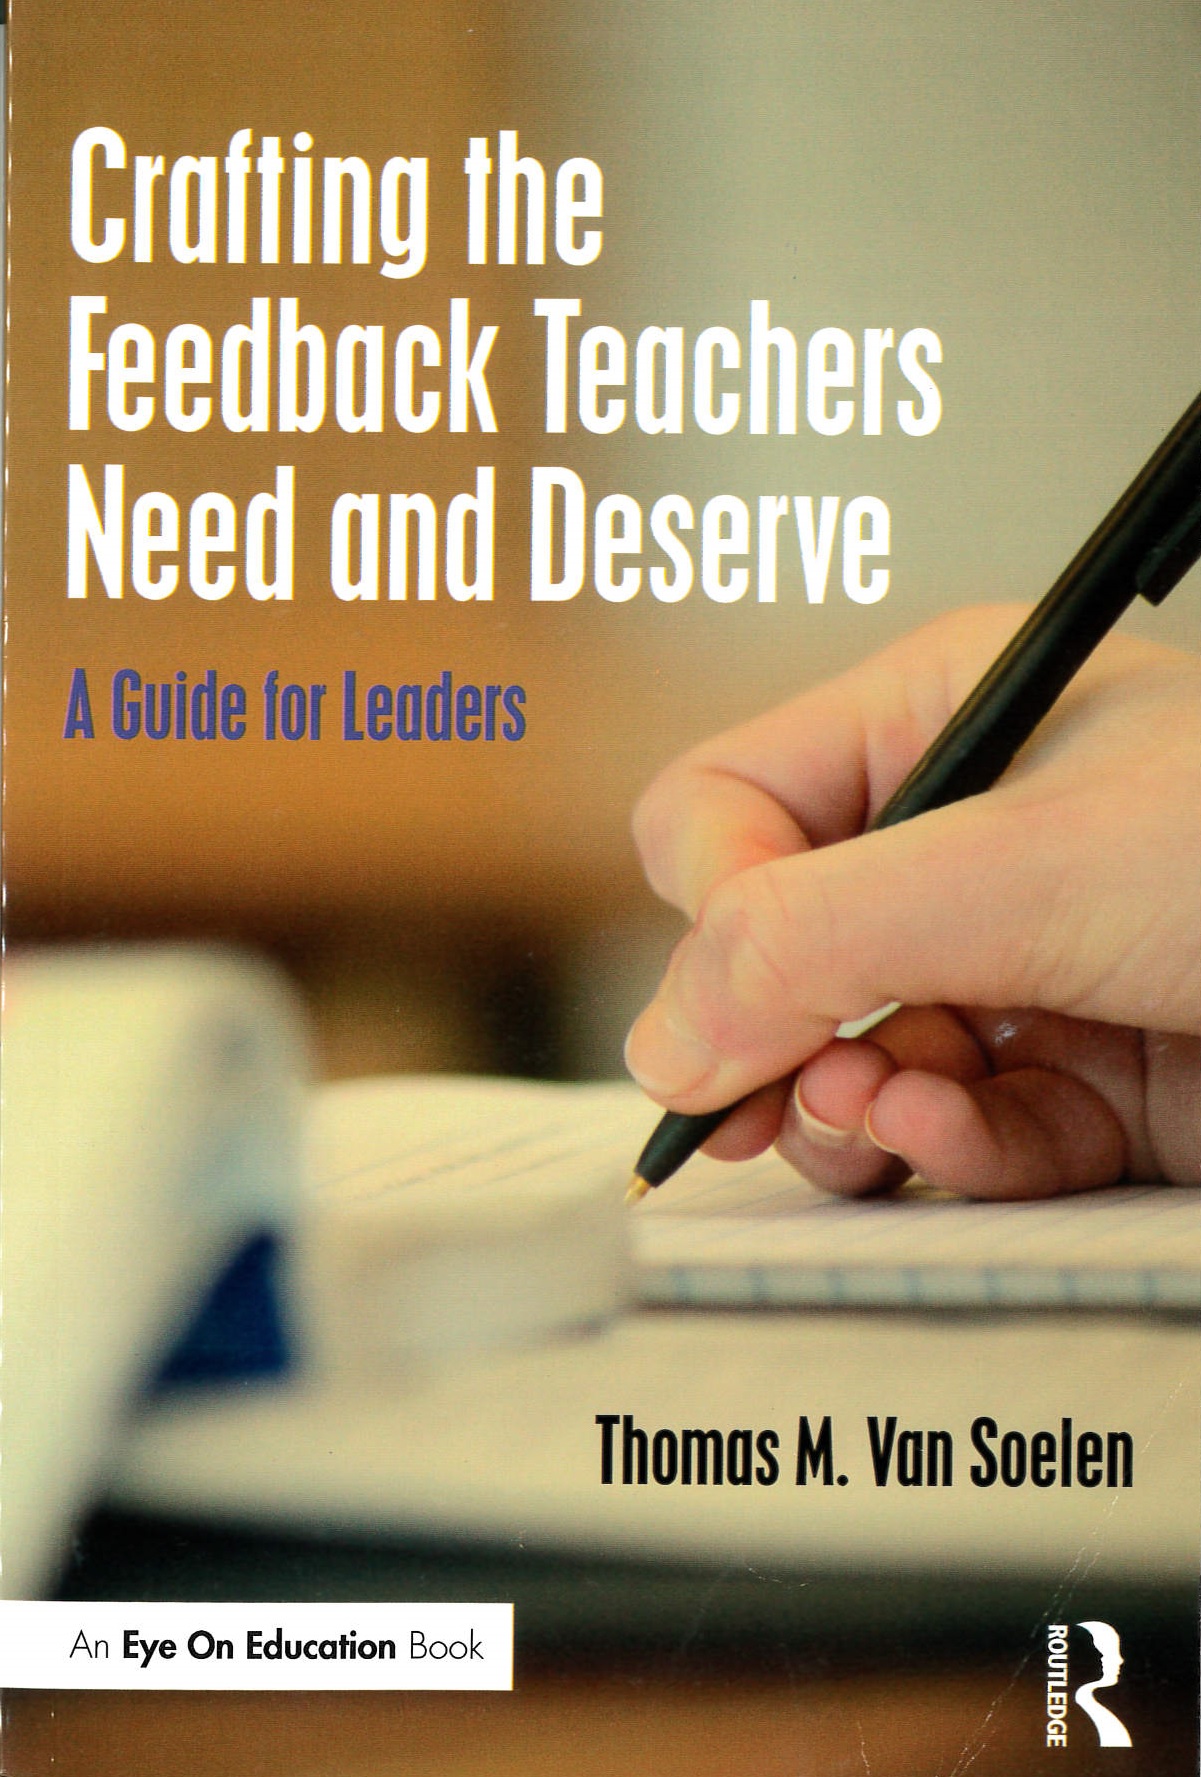 Crafting the feedback teachers need and deserve : a guide for leaders